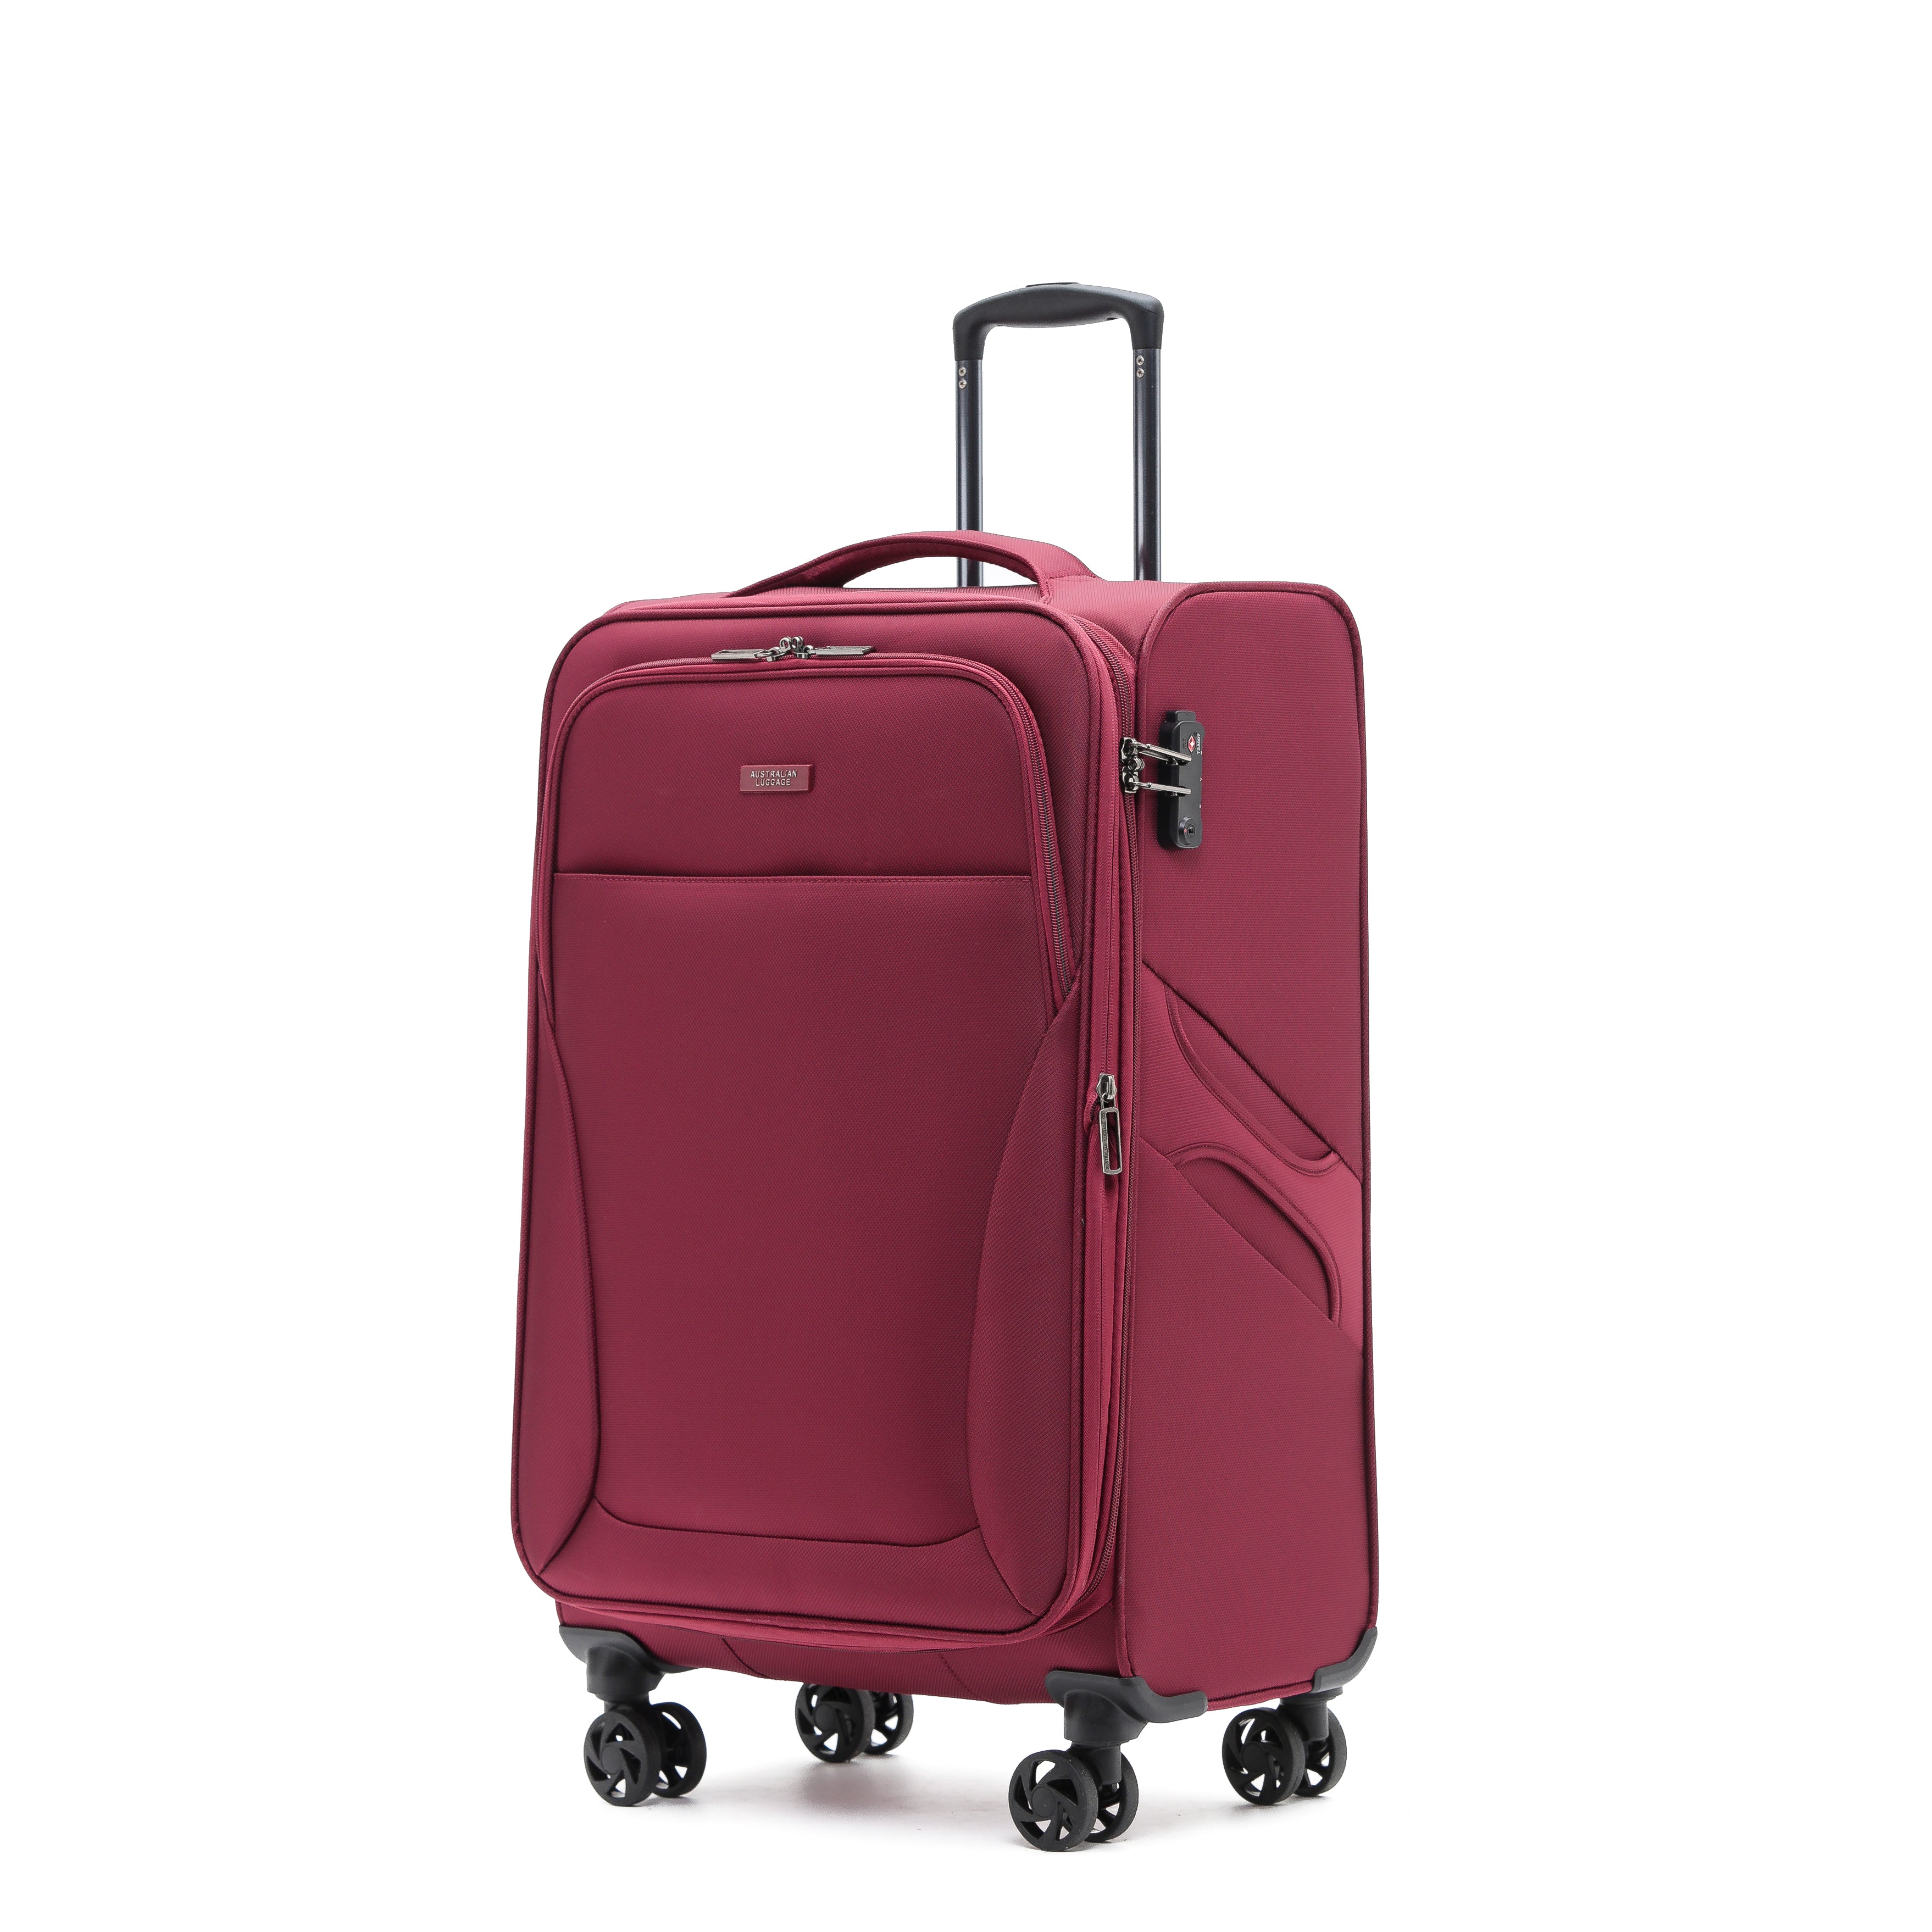 AUS LUGGAGE - WINGS Trolley Case 29in Large - Wine-3